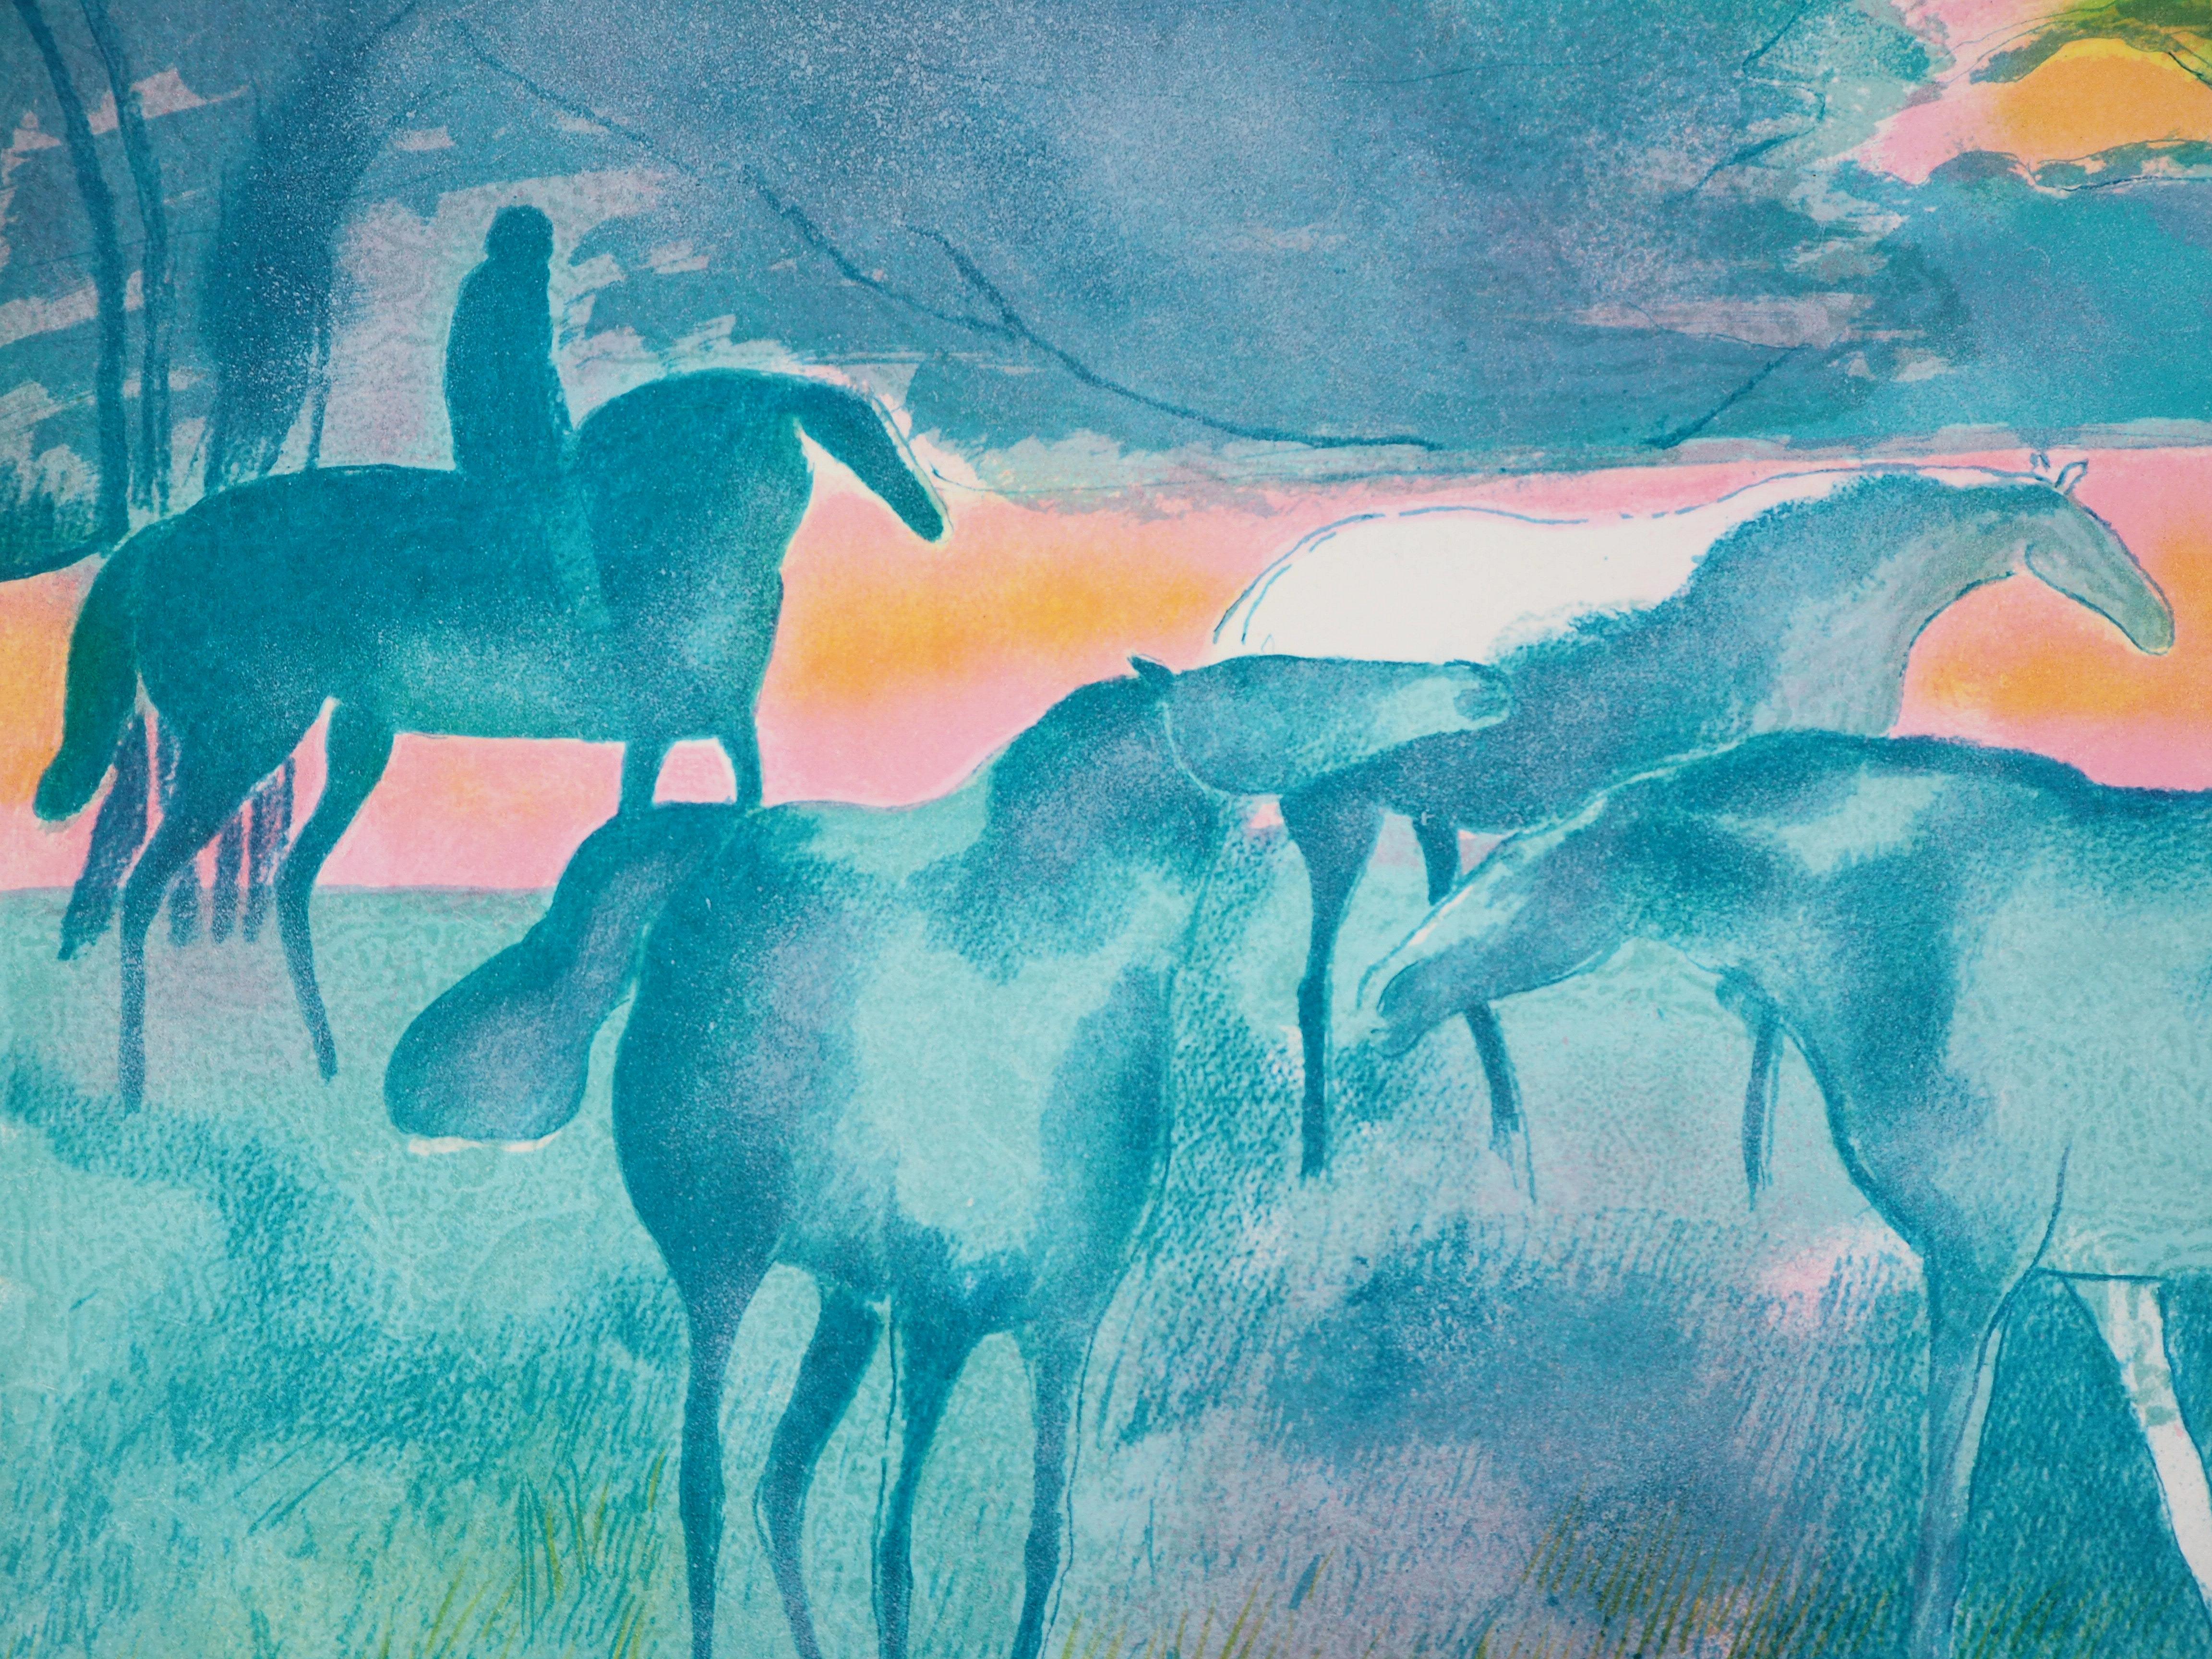 Horses at sunset - Original lithograph, Handsigned - Modern Painting by Paul Guiramand